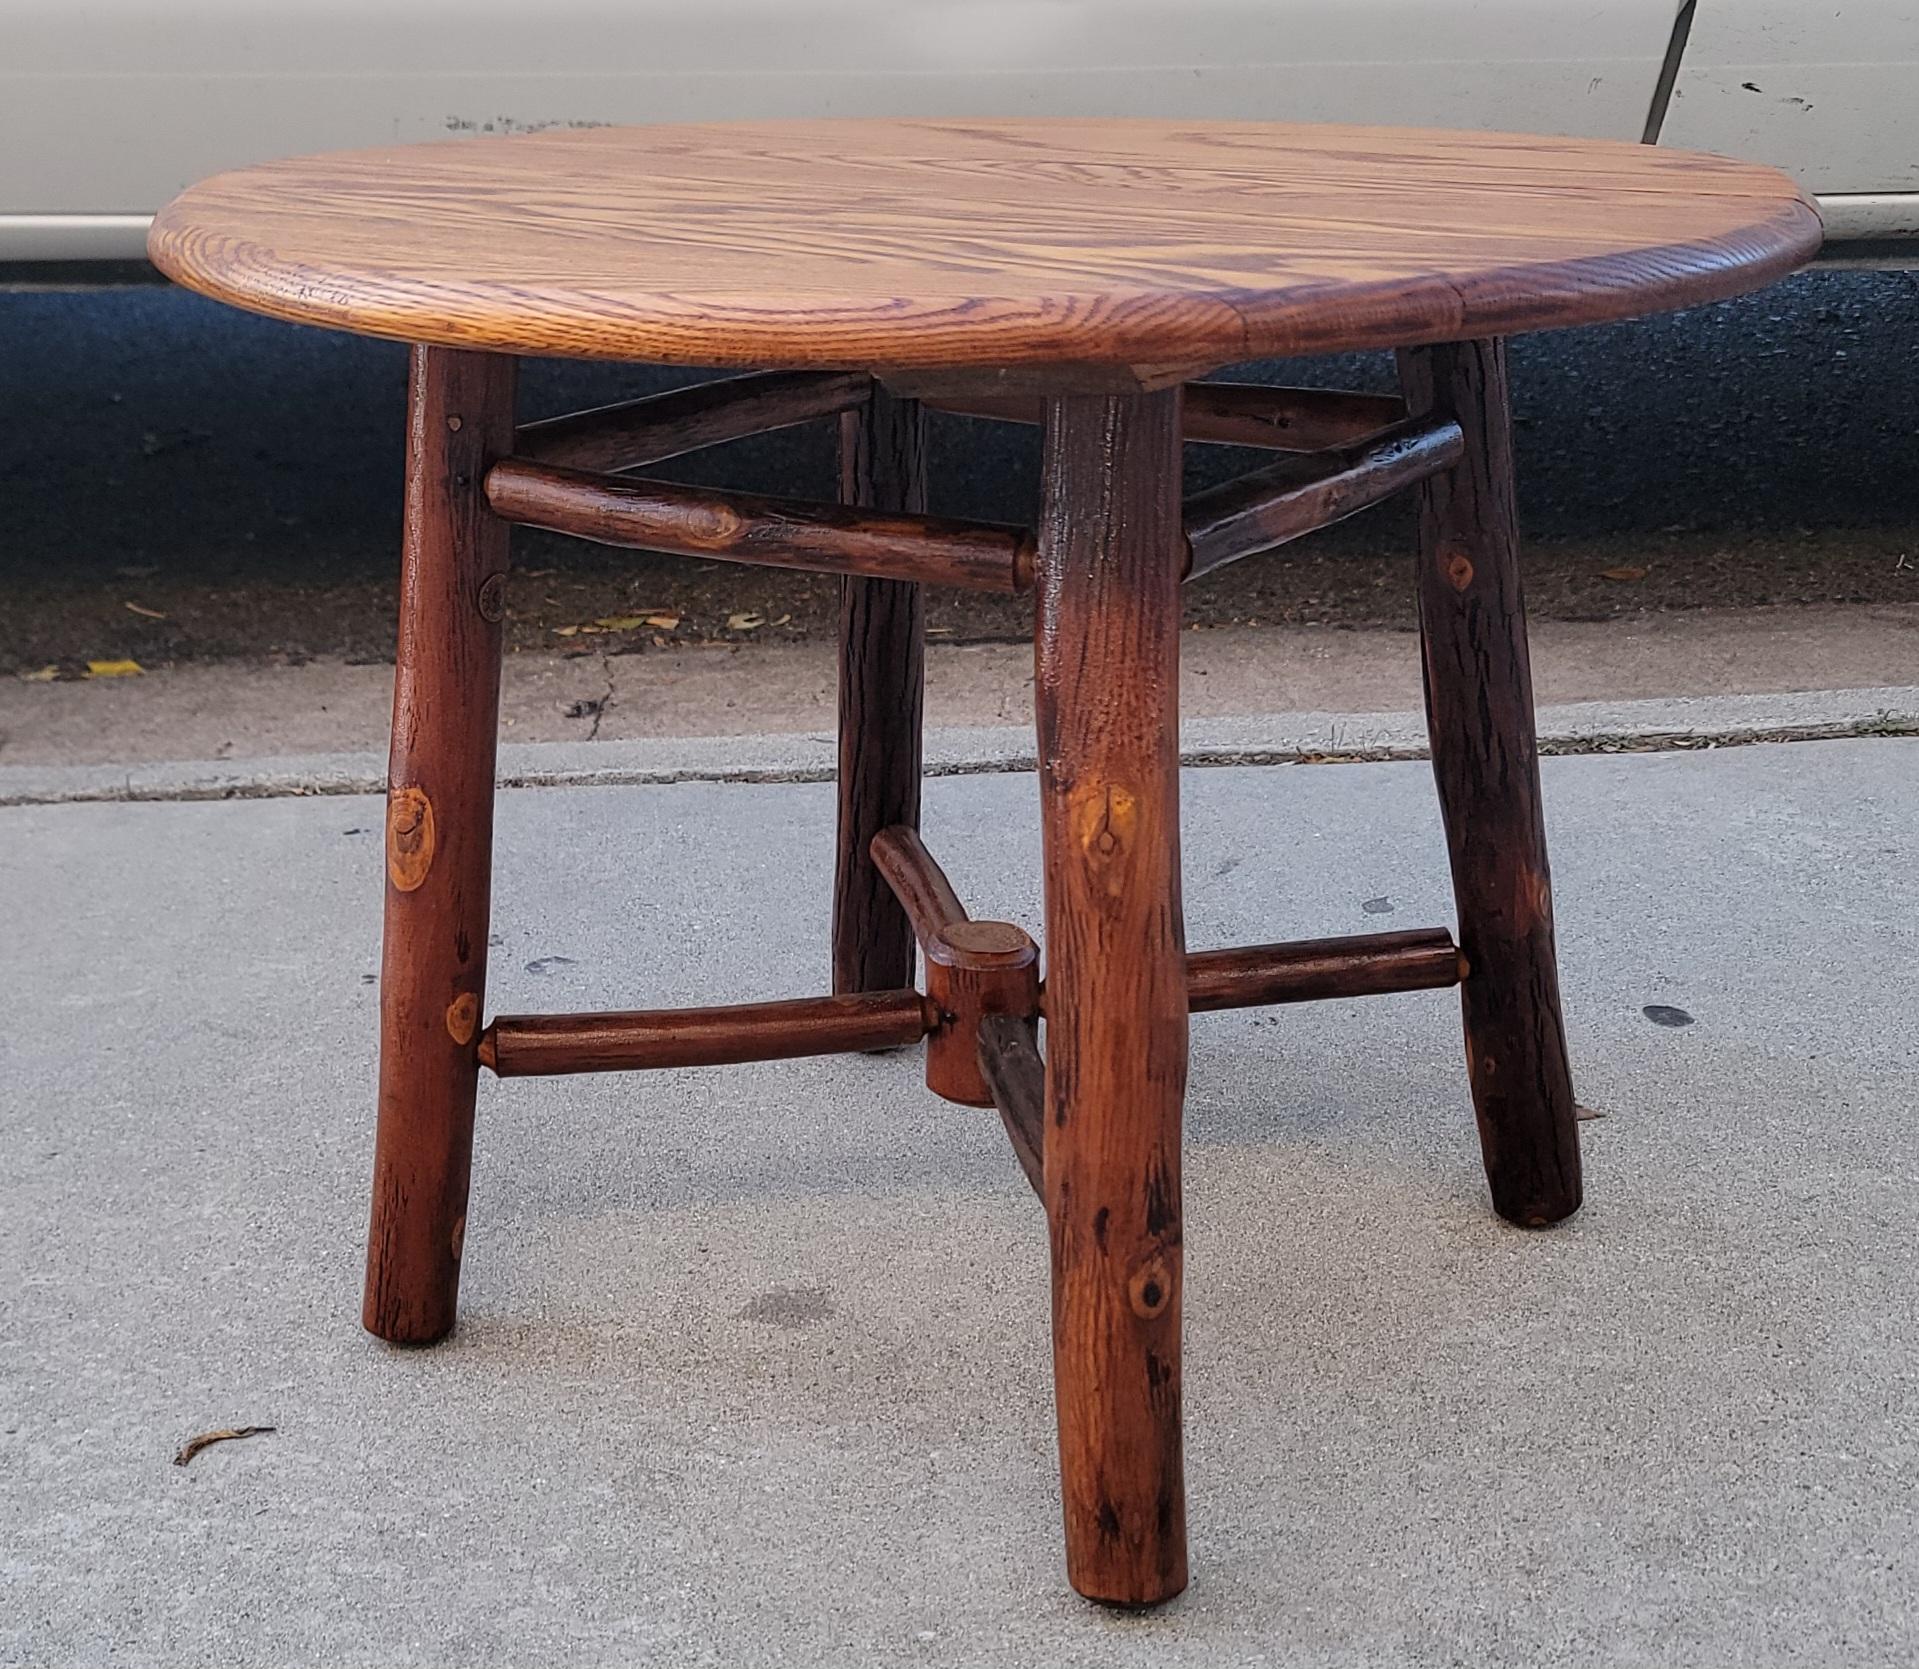 1930's Signed Old Hickory side table from Martinsville,Indiana in pristine condition. This table has a fine patina.